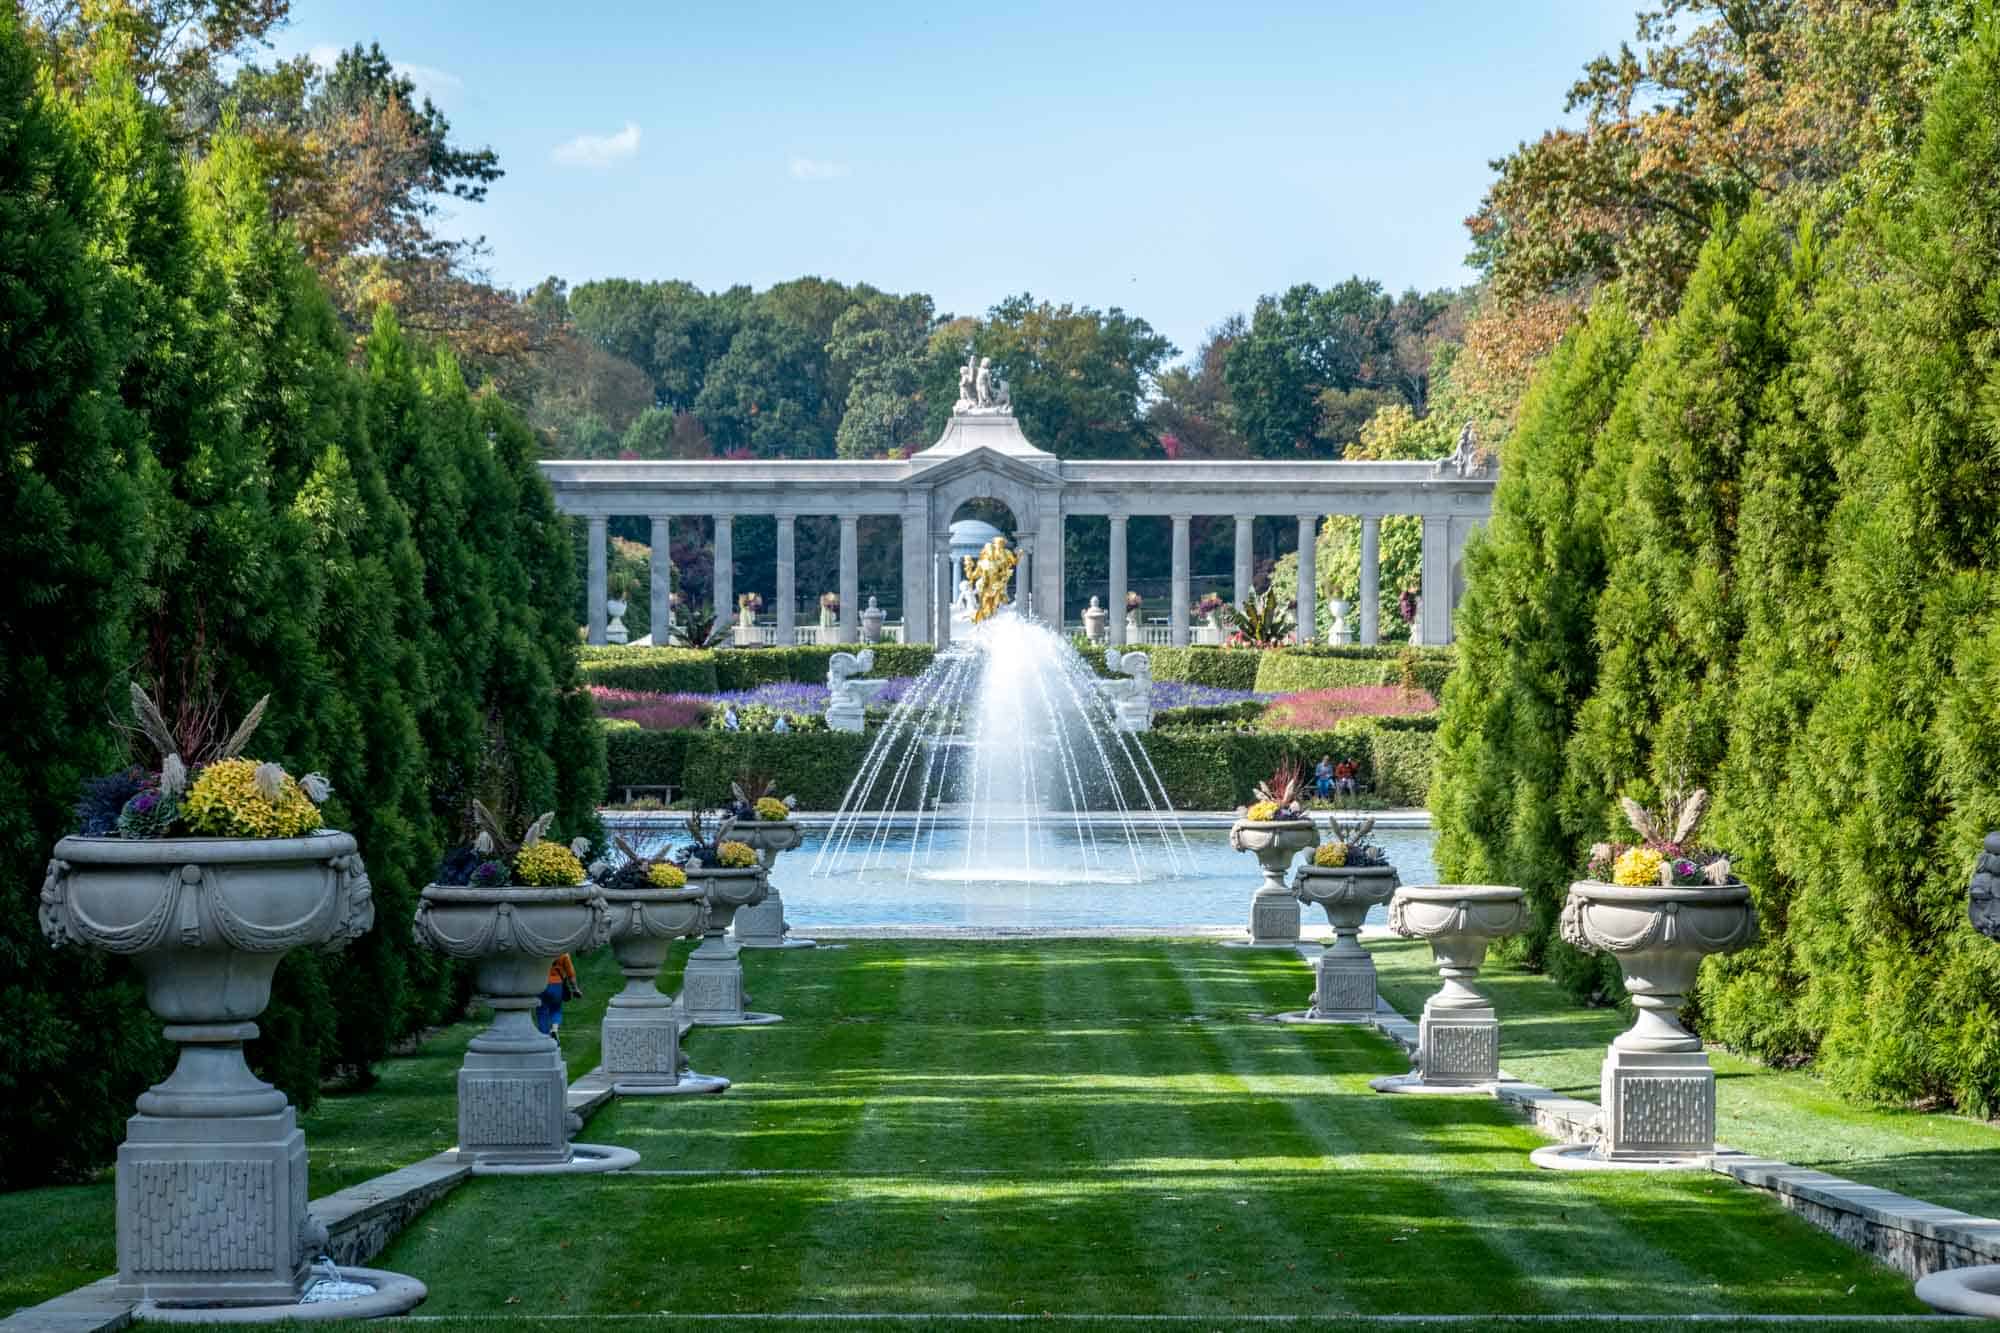 Grand fountain at the end of a grass path lined by statues